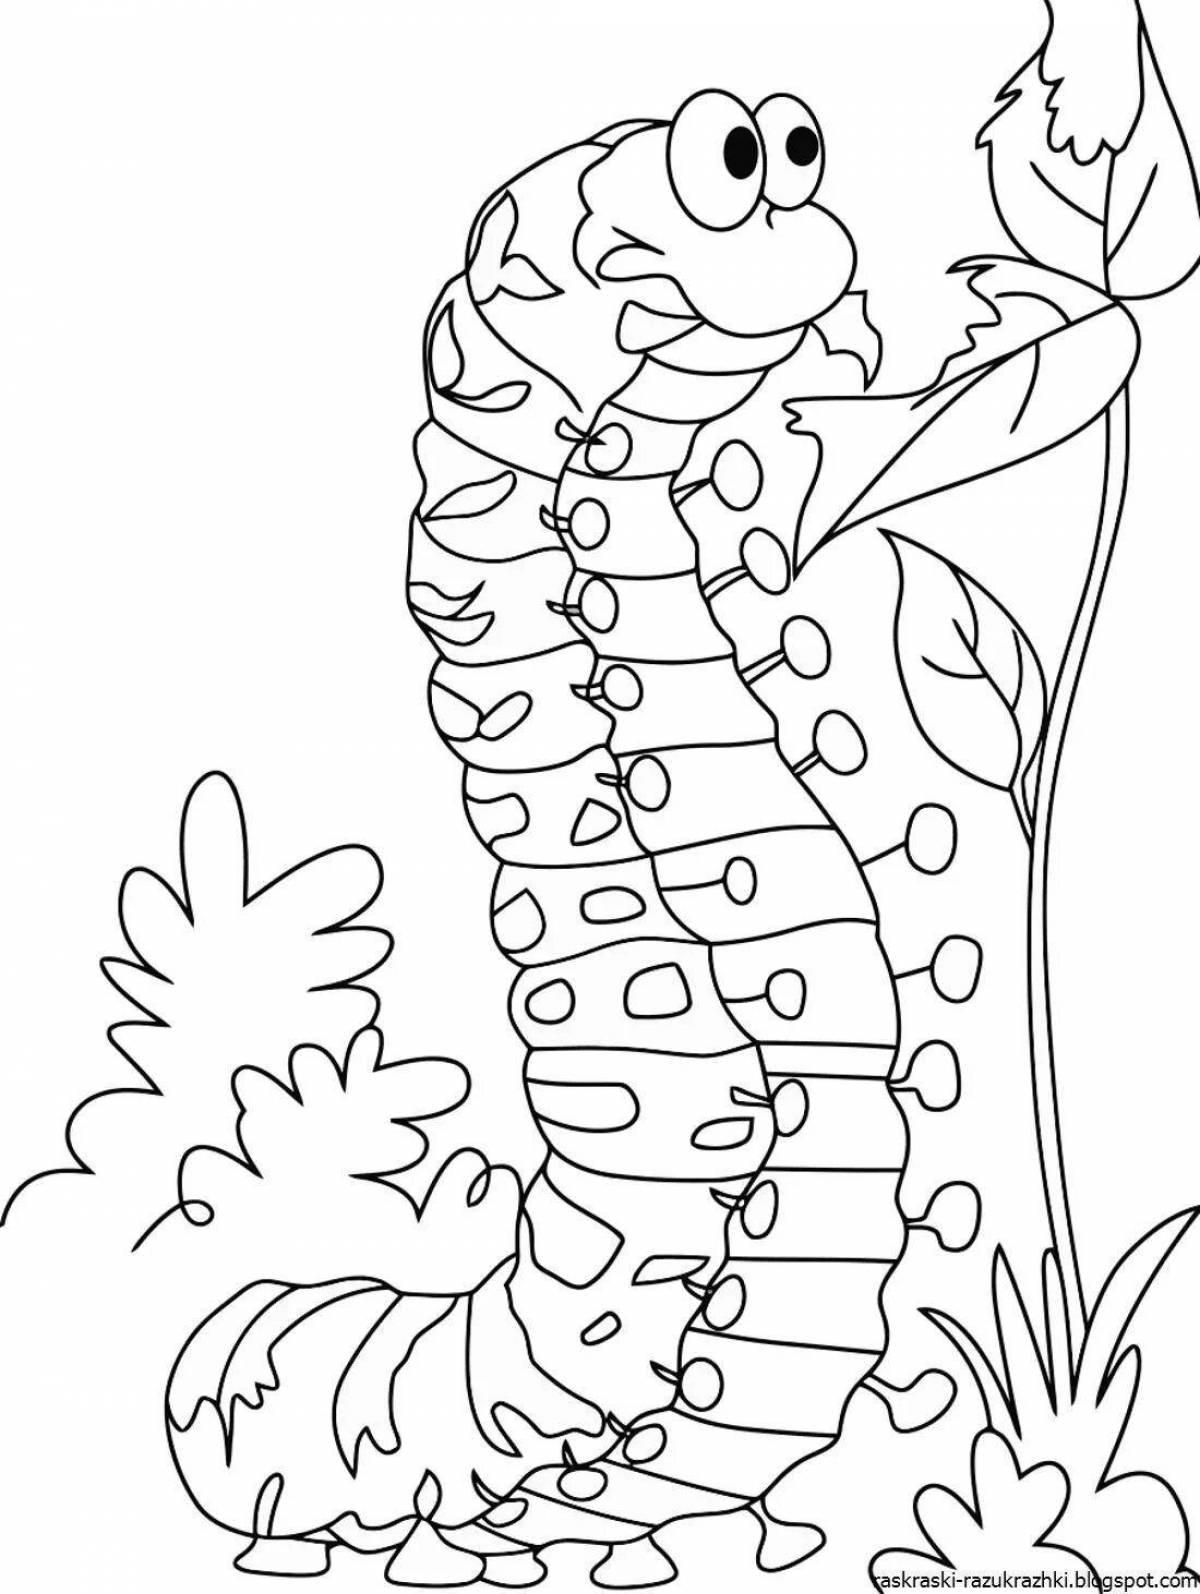 Fun insect coloring pages for 6-7 year olds